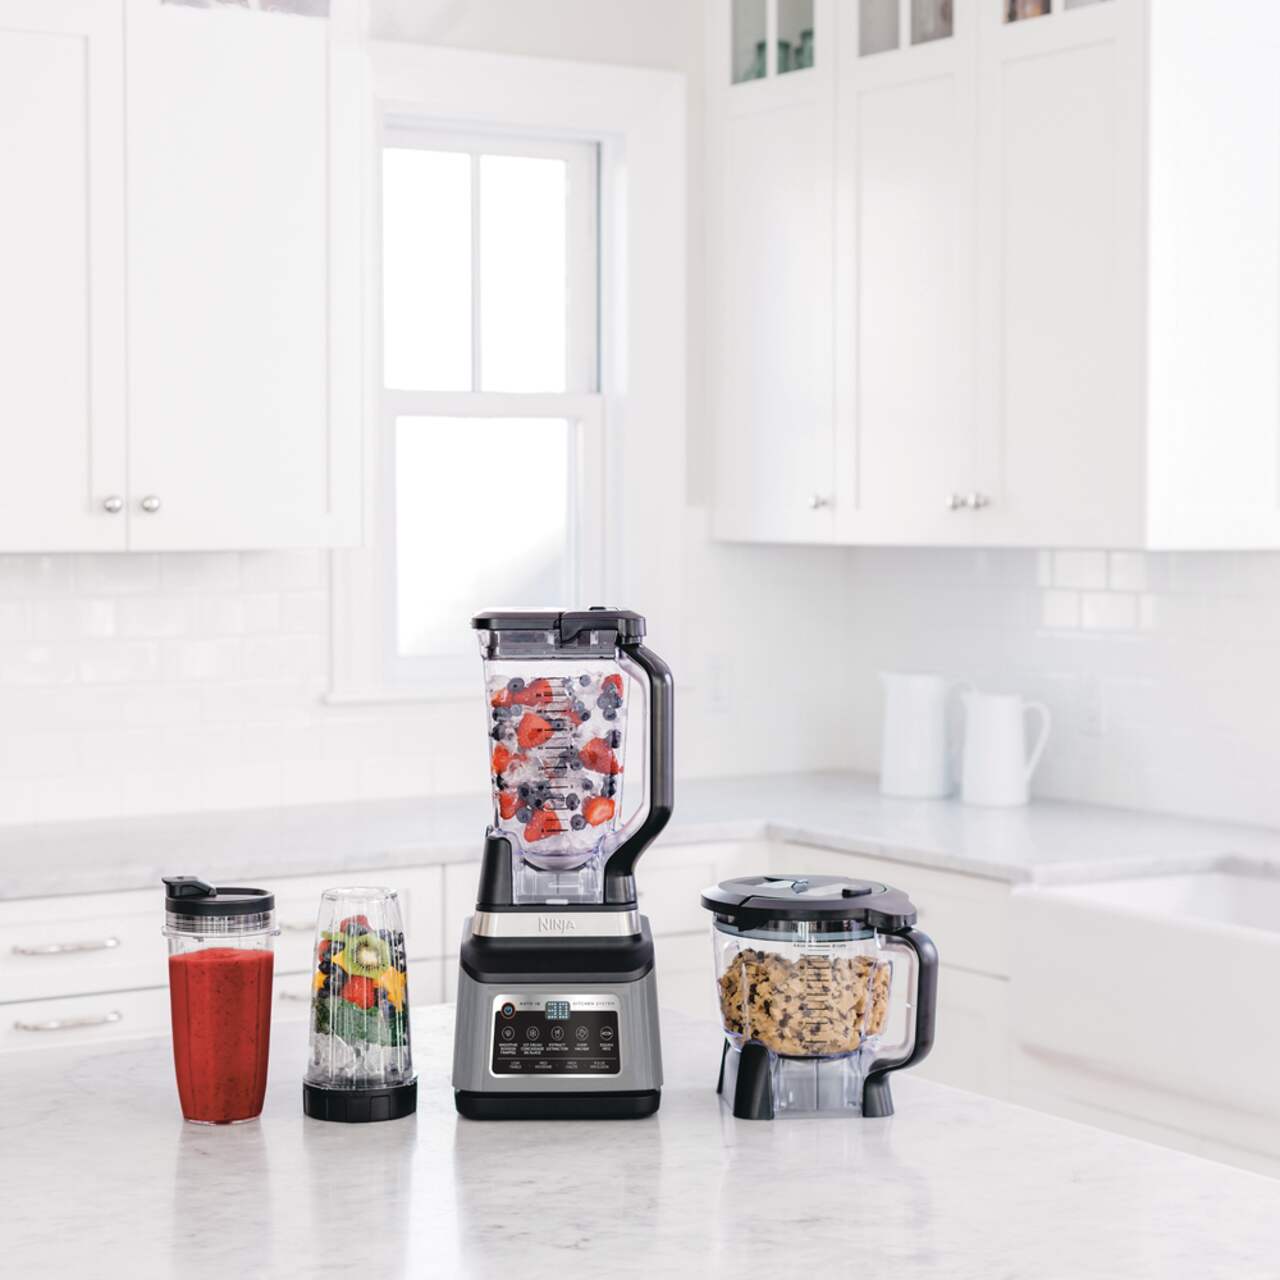 https://media-www.canadiantire.ca/product/living/kitchen/kitchen-appliances/0430731/ninja-professional-plus-kitchen-system-with-auto-iq-7b8b5a67-2c45-45c4-a68b-4636fcd5060a.png?imdensity=1&imwidth=1244&impolicy=mZoom